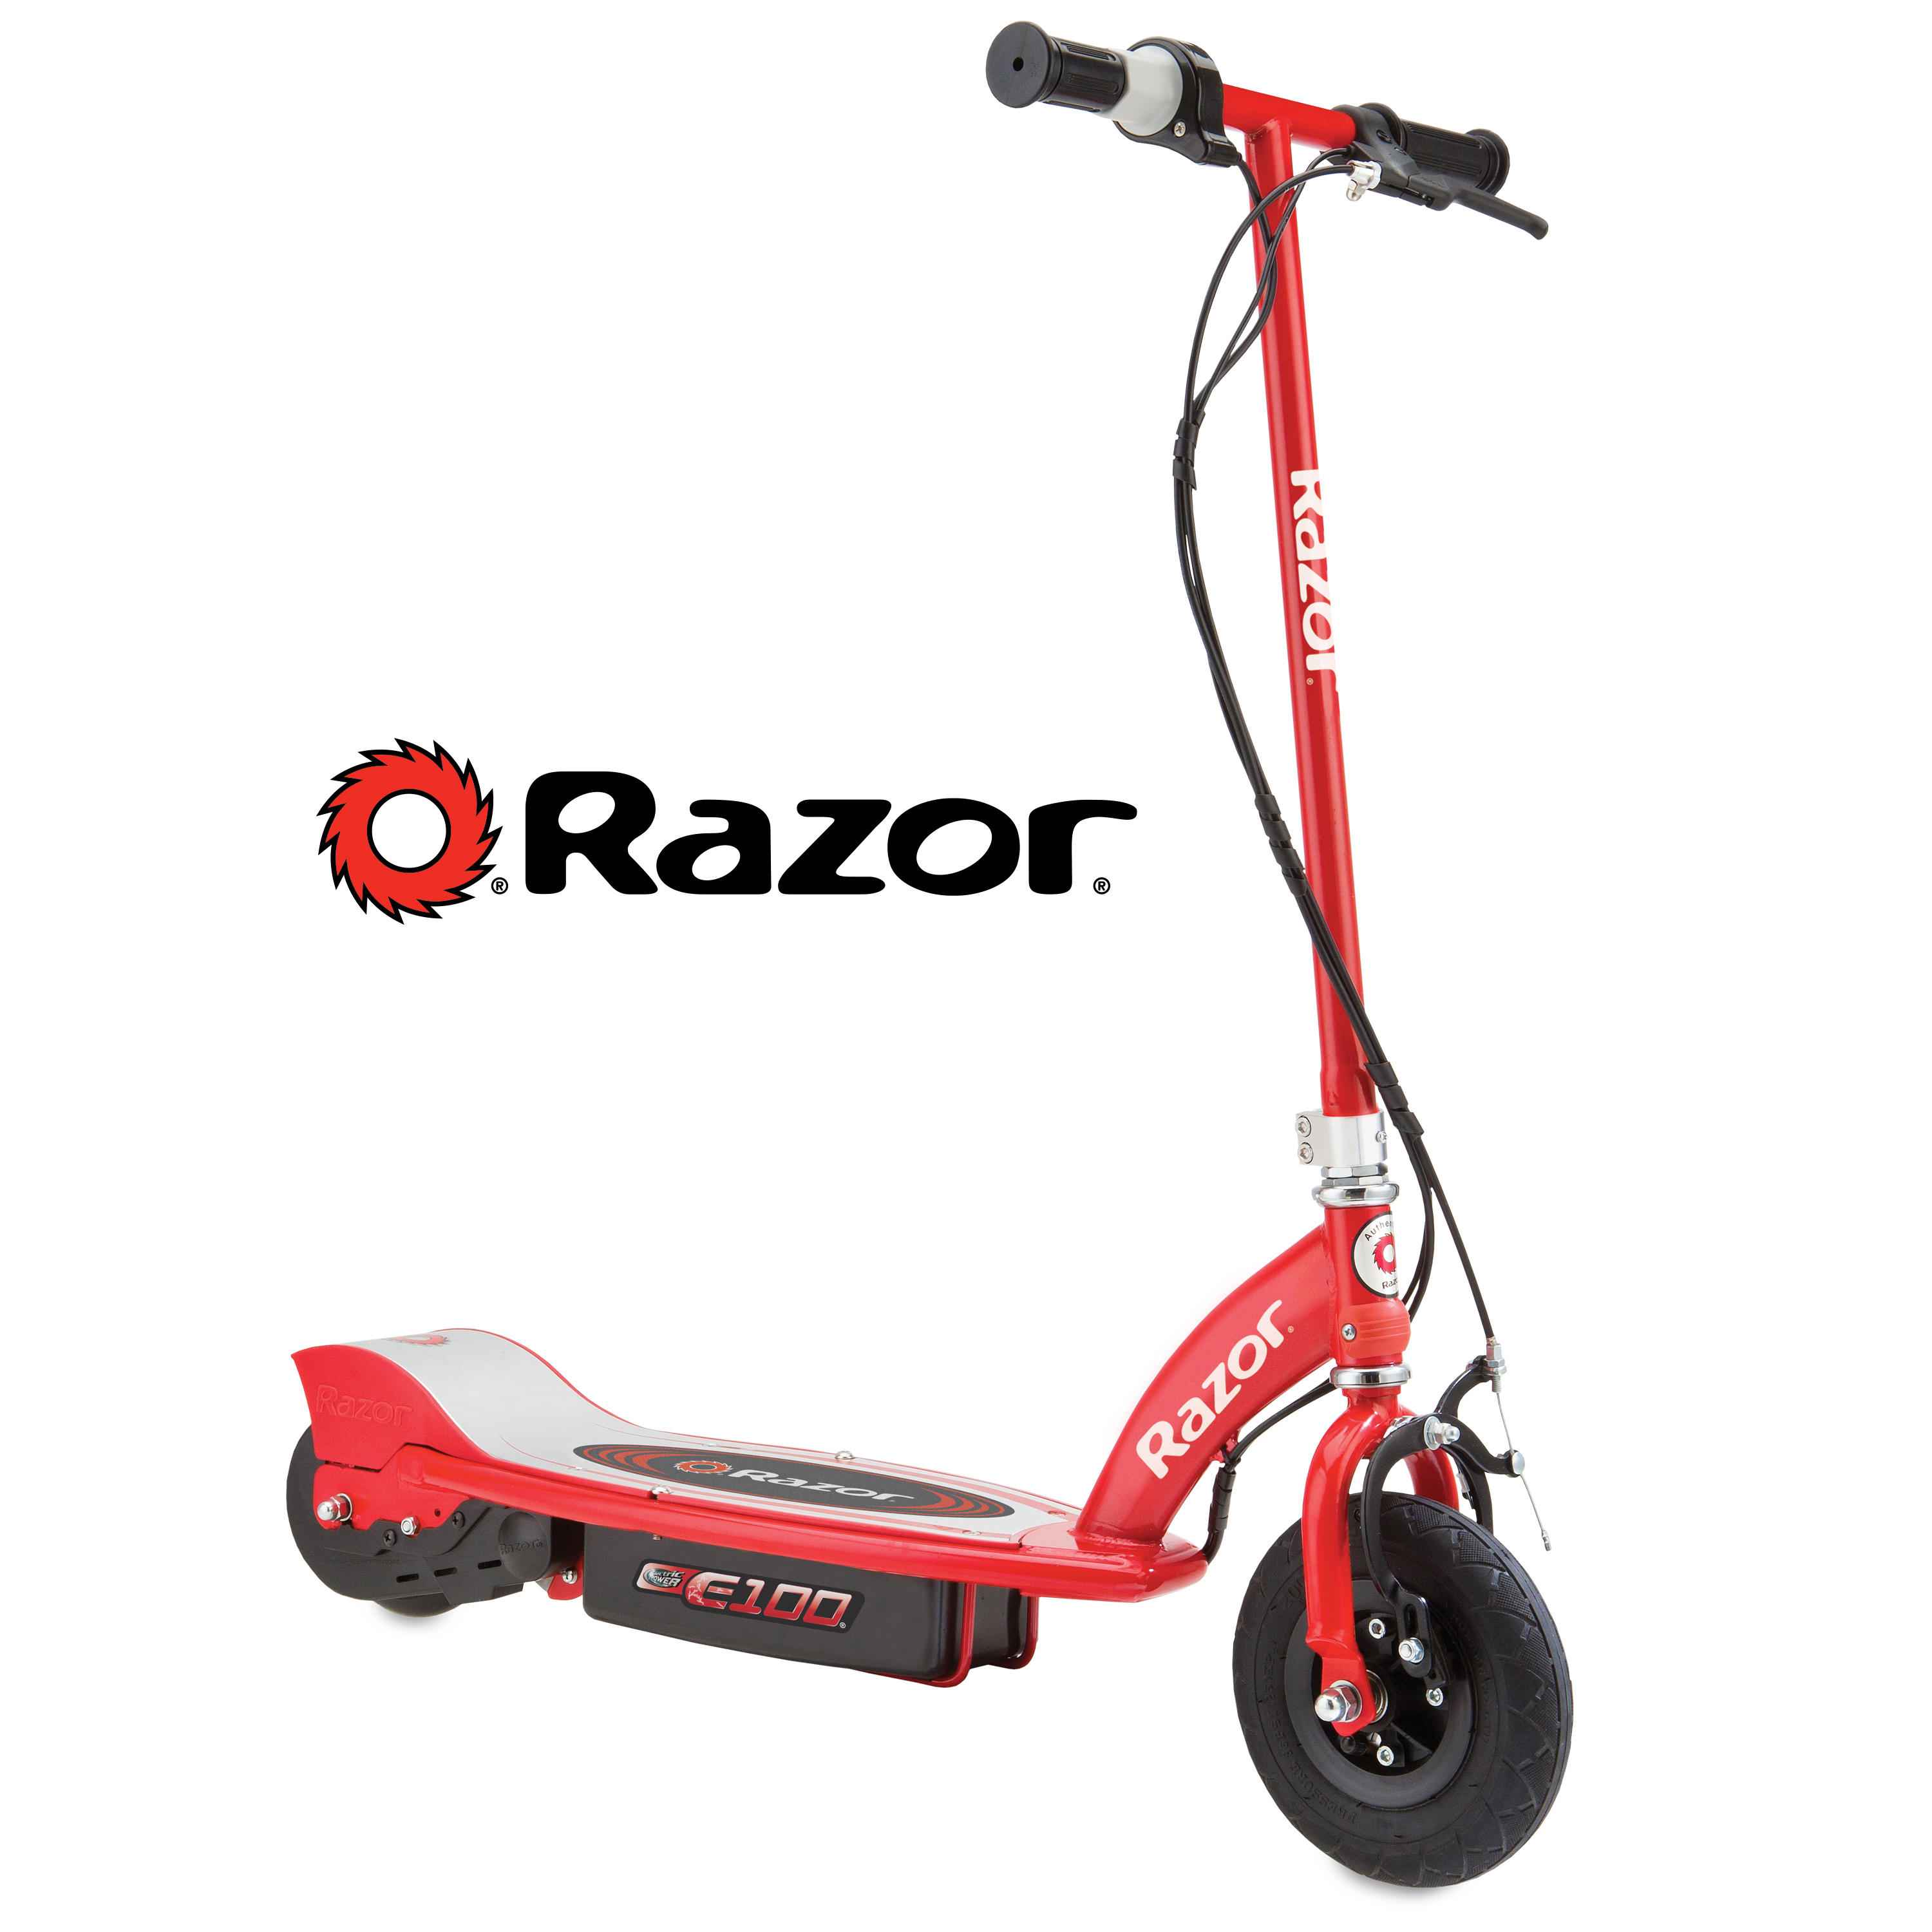 Razor E100 Electric Scooter - Red, for Kids Ages 8+ and up to 120 lbs, 8" Pneumatic Front Tire, 100W Chain Motor, Up to 10 mph & Up to 40 mins of Ride Time, 24V Sealed Lead-Acid Battery - image 3 of 8